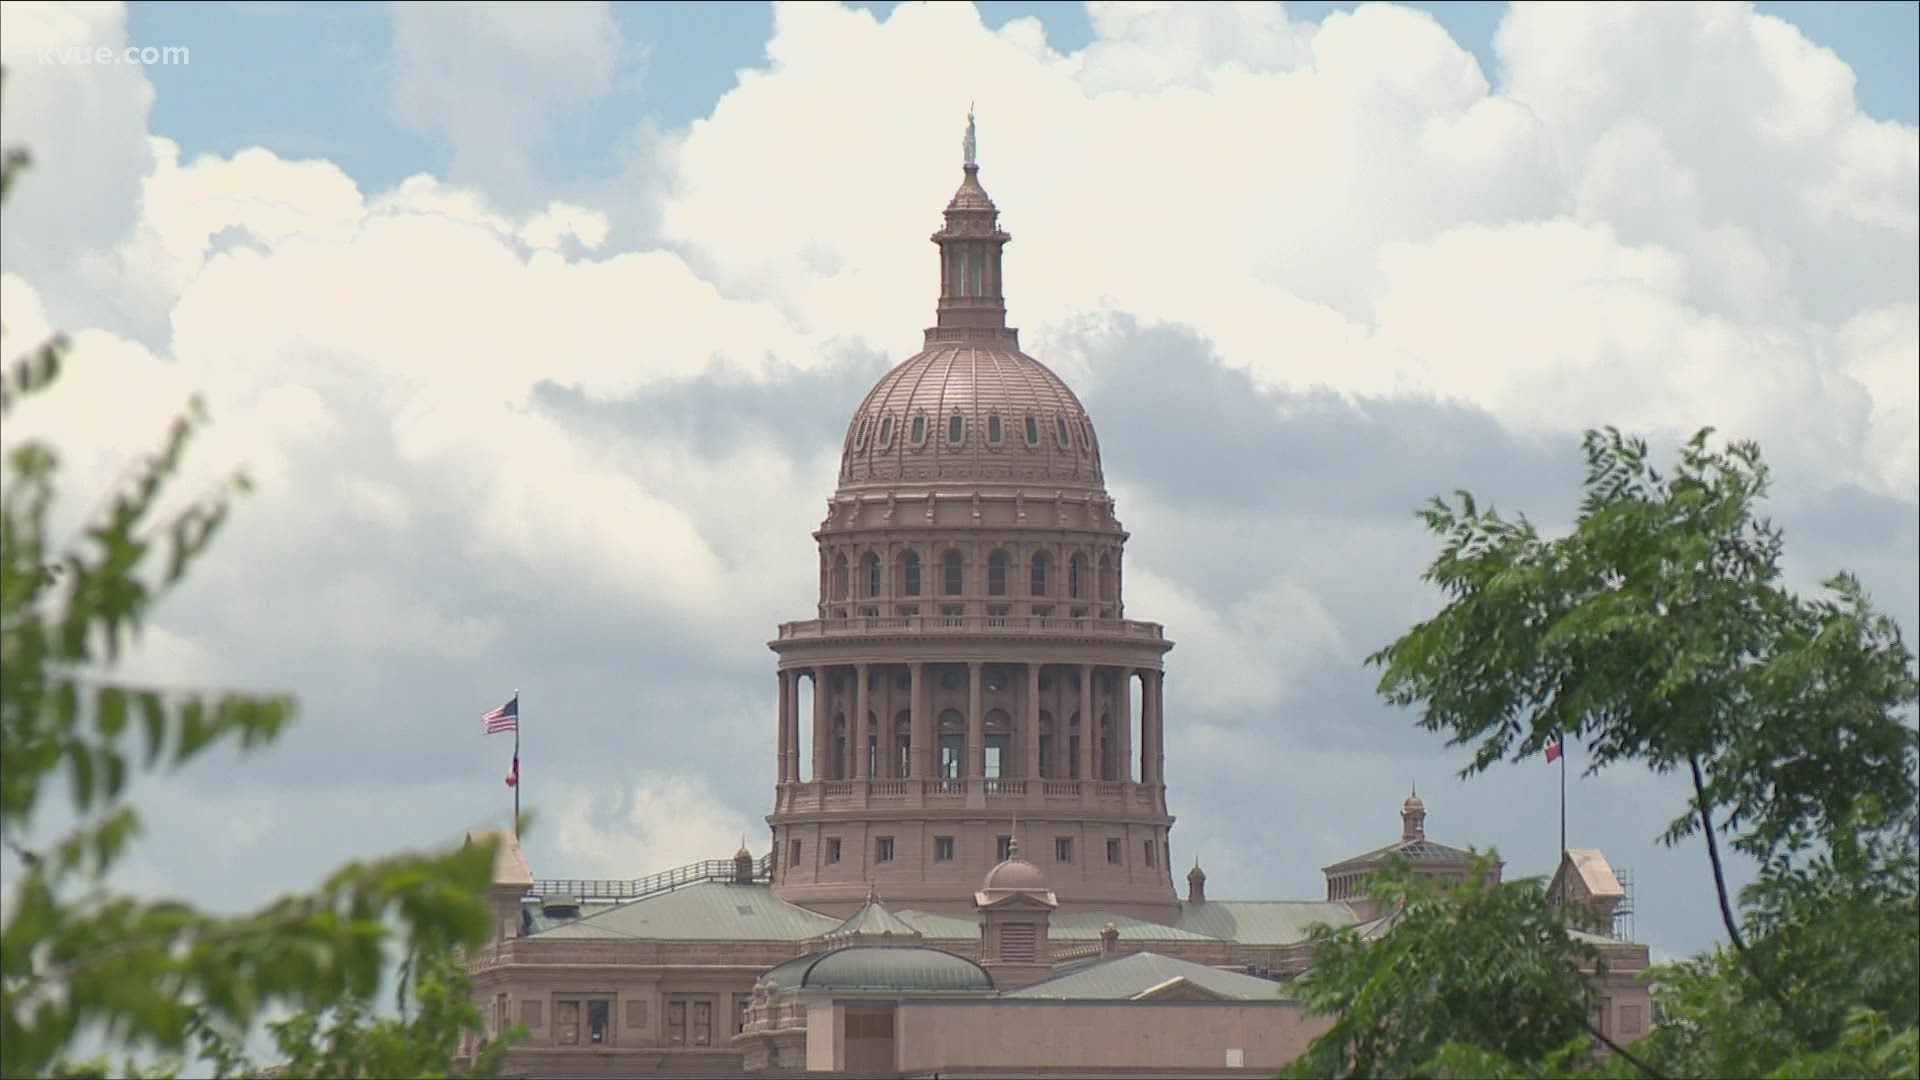 A fast-moving bill that would've changed energy prices after February's winter storms appears to be dead on arrival in the Texas House.